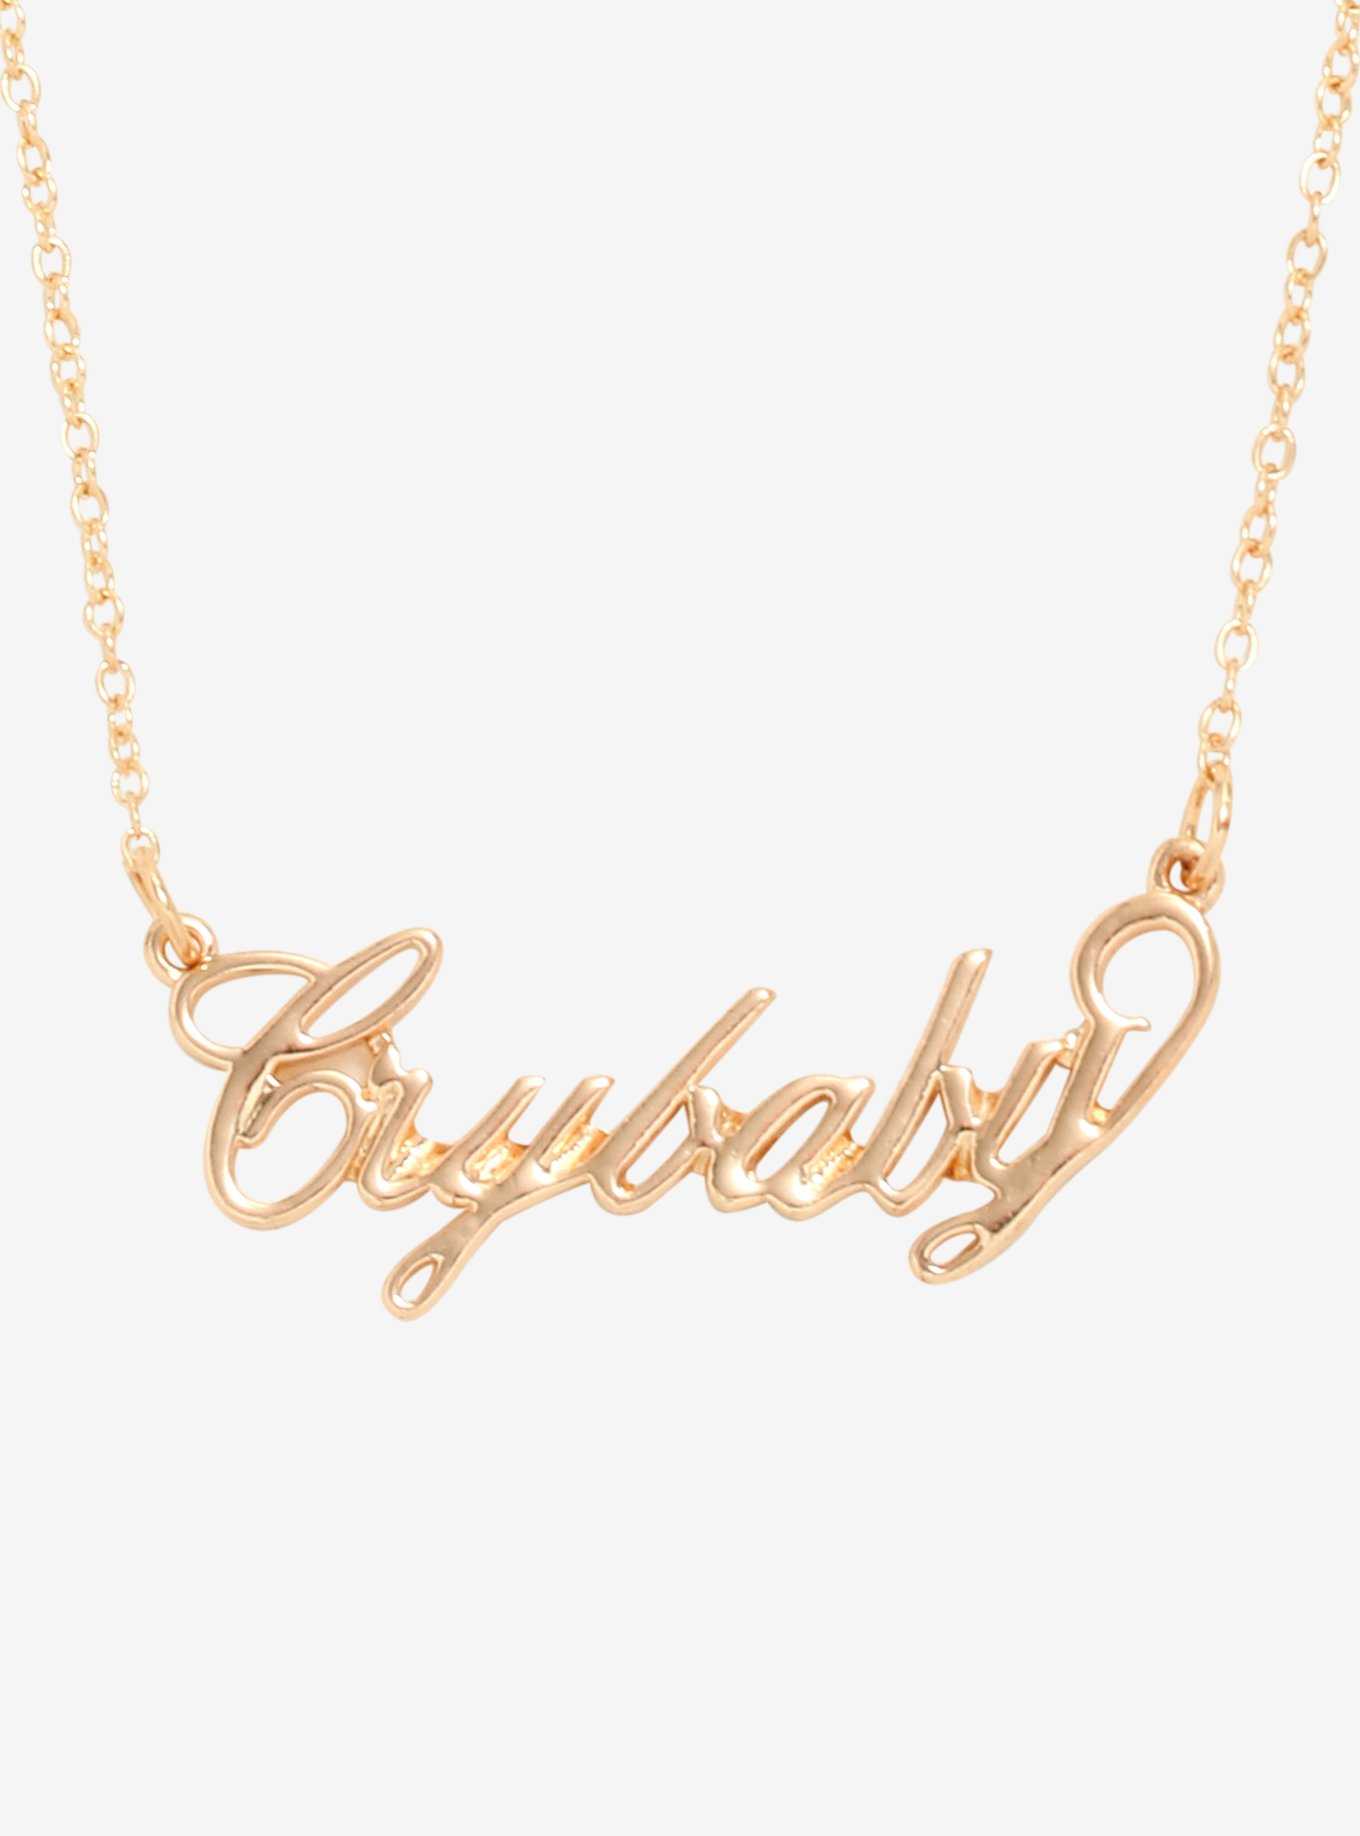 3.0 Bff Necklace - S Right